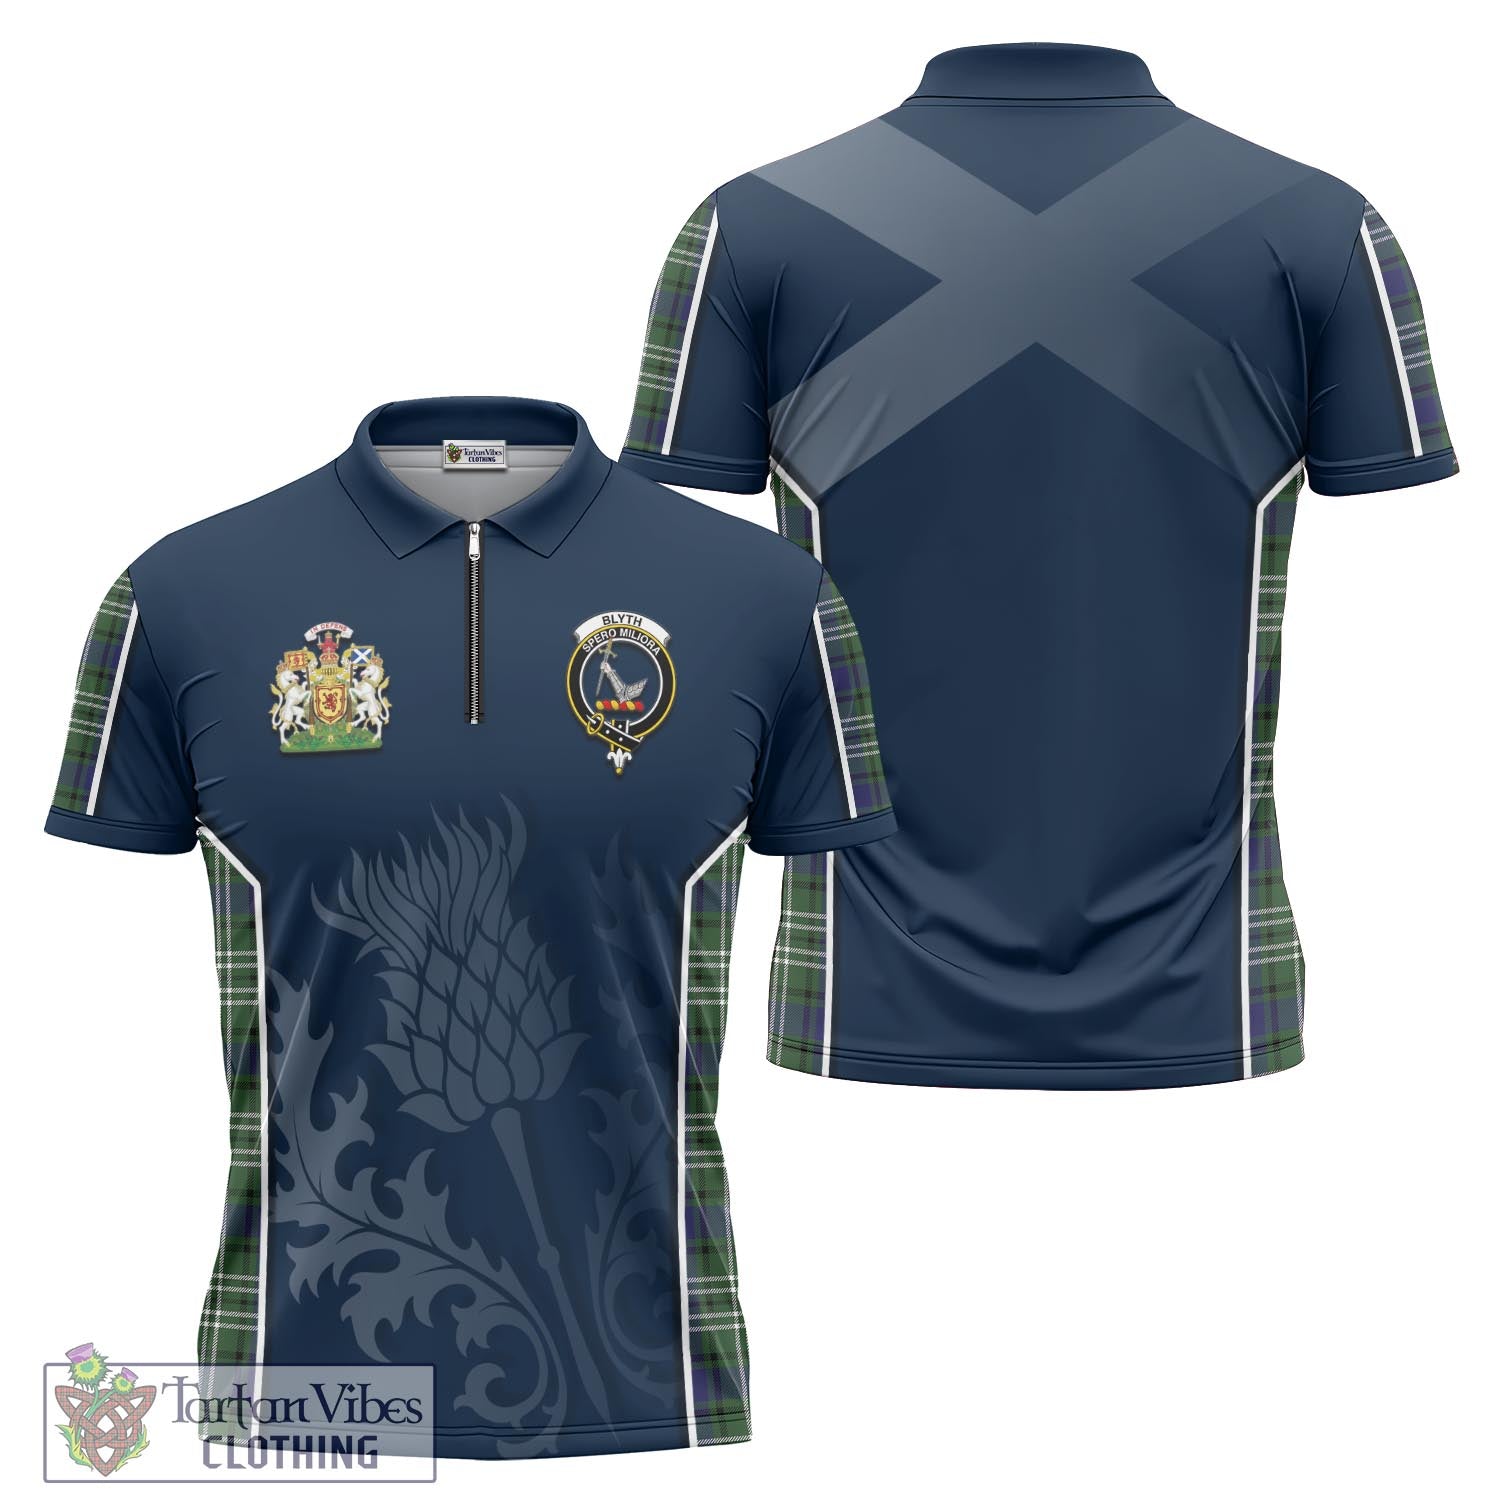 Tartan Vibes Clothing Blyth Tartan Zipper Polo Shirt with Family Crest and Scottish Thistle Vibes Sport Style